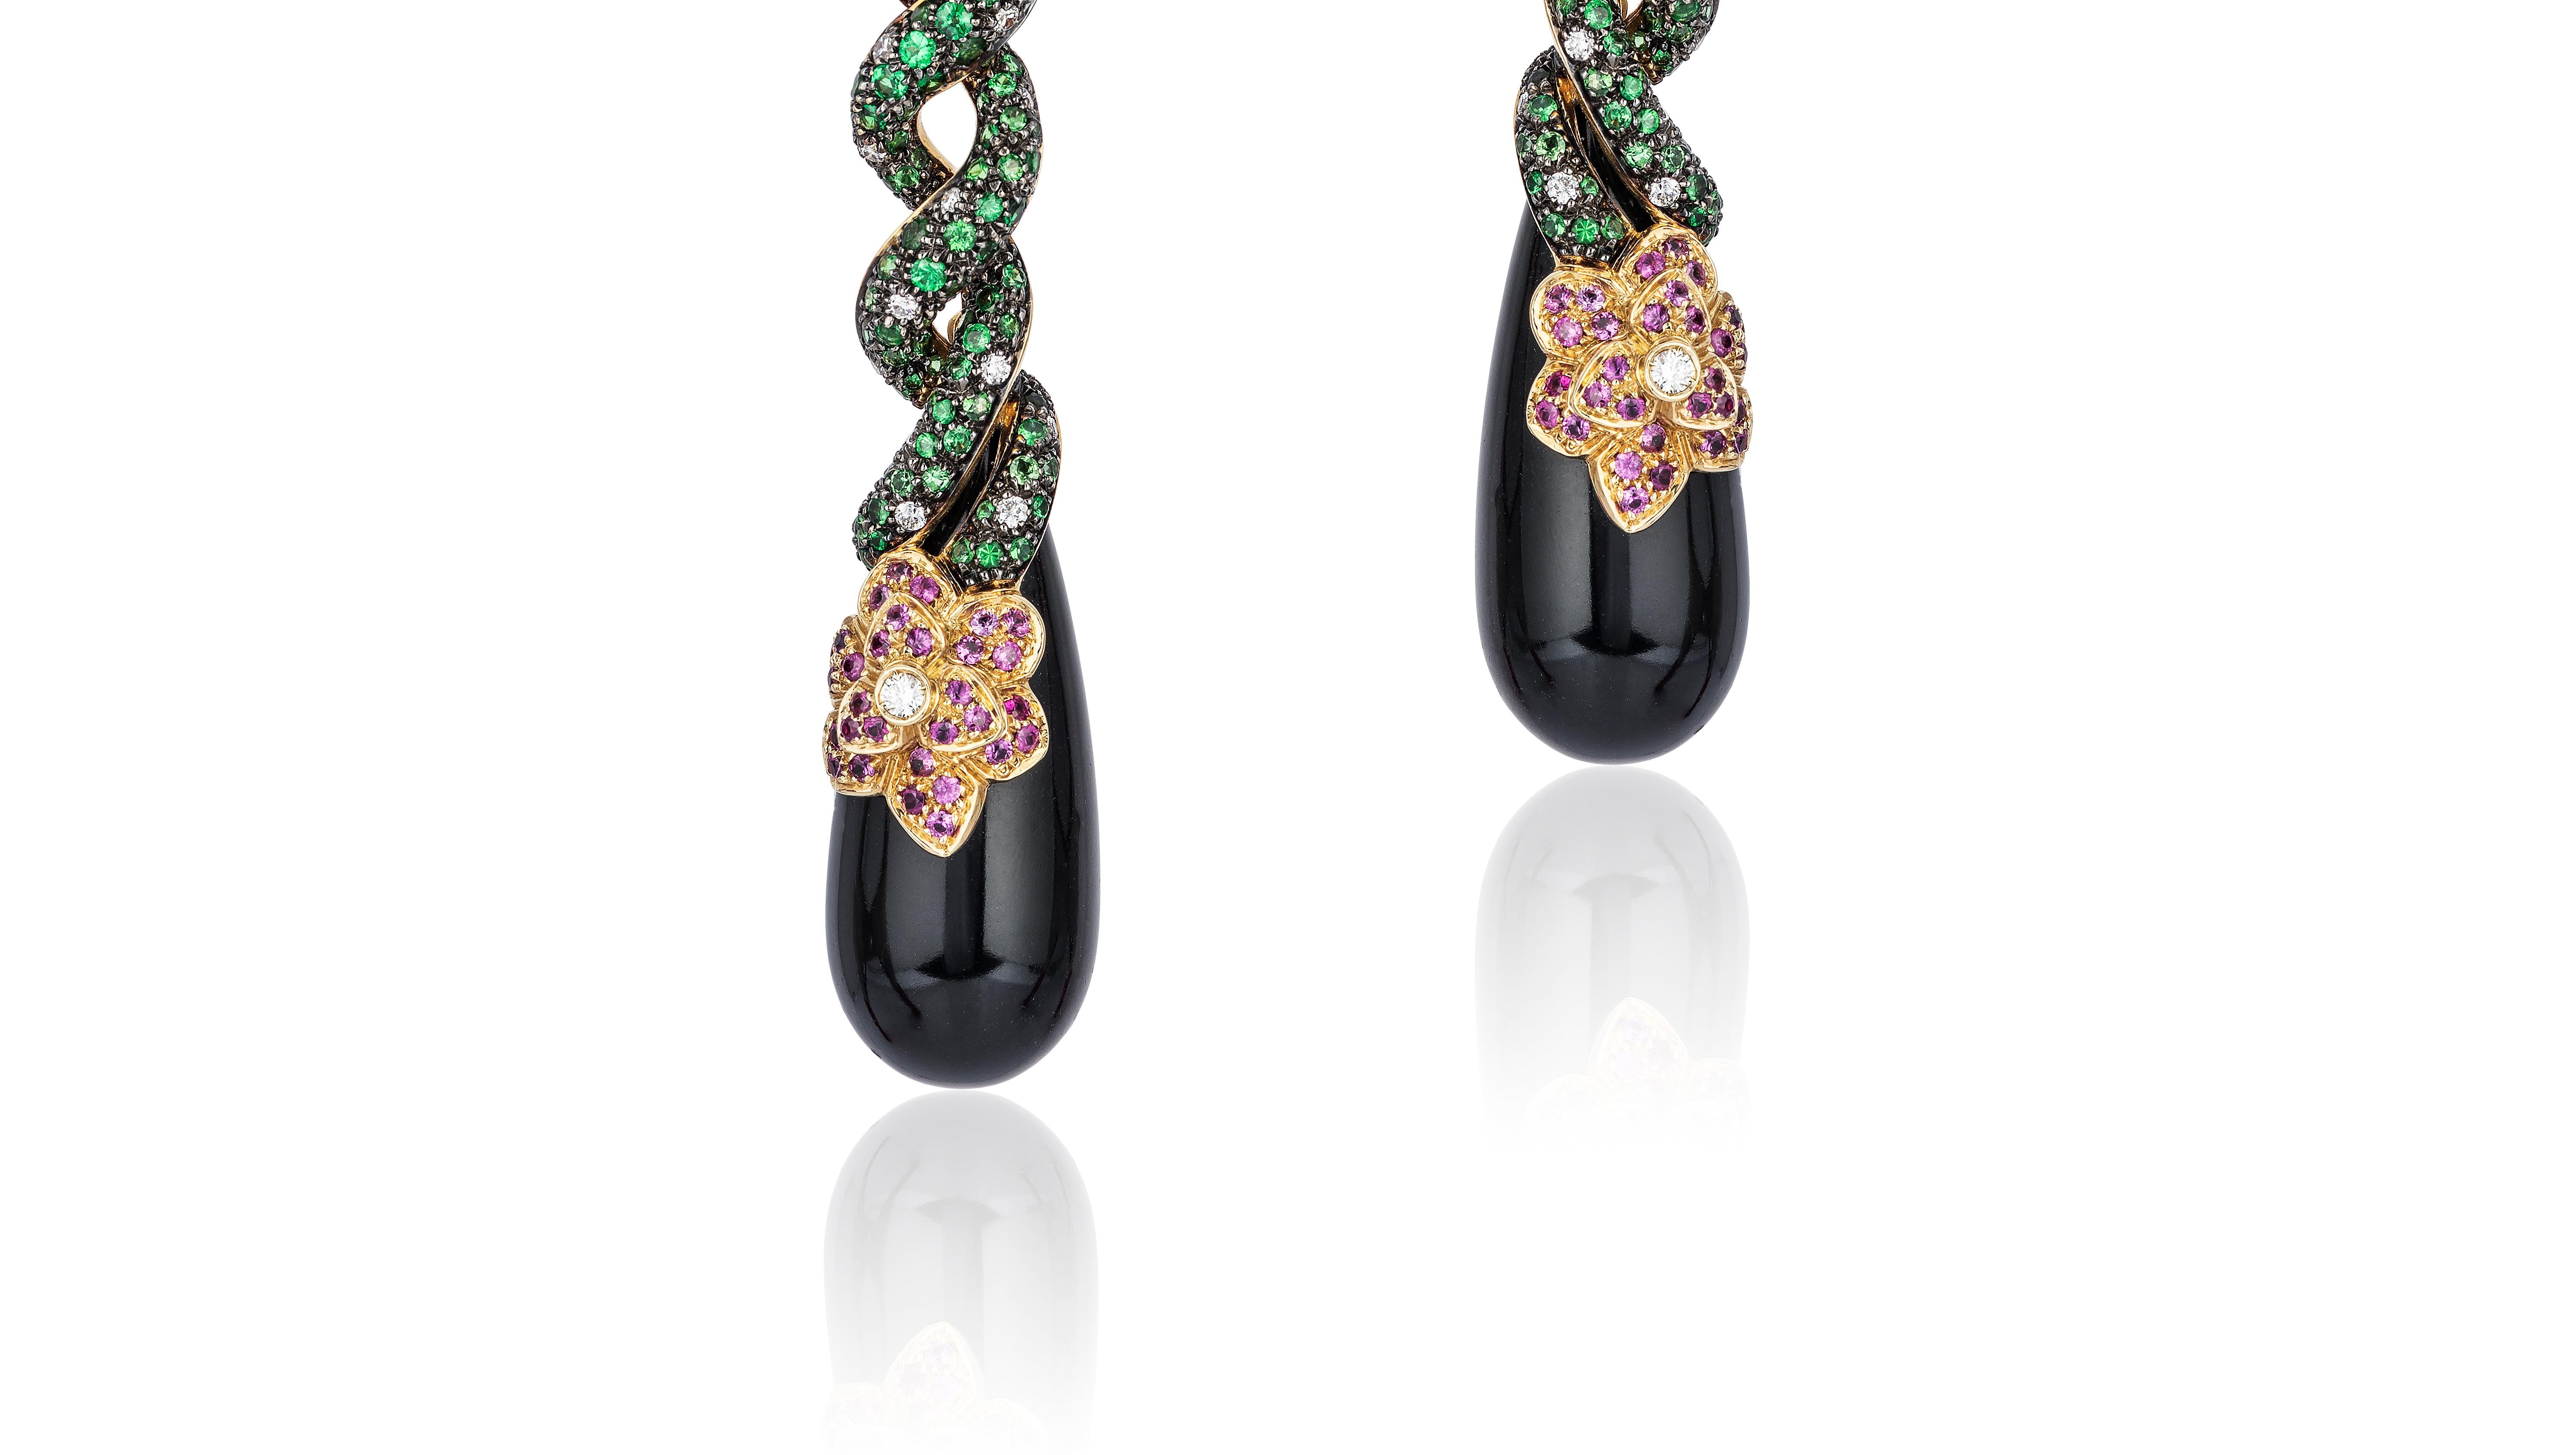 Andreoli Onyx Snake Diamond Tsavorite Pink Sapphire Drop Earrings 18KT Yellow Gold. The snake features 0.57 carats of full round brilliant cut diamonds. The diamonds are F/G/H in Color, VS-SI in Clarity. The snake is also accented with 3.37 carats